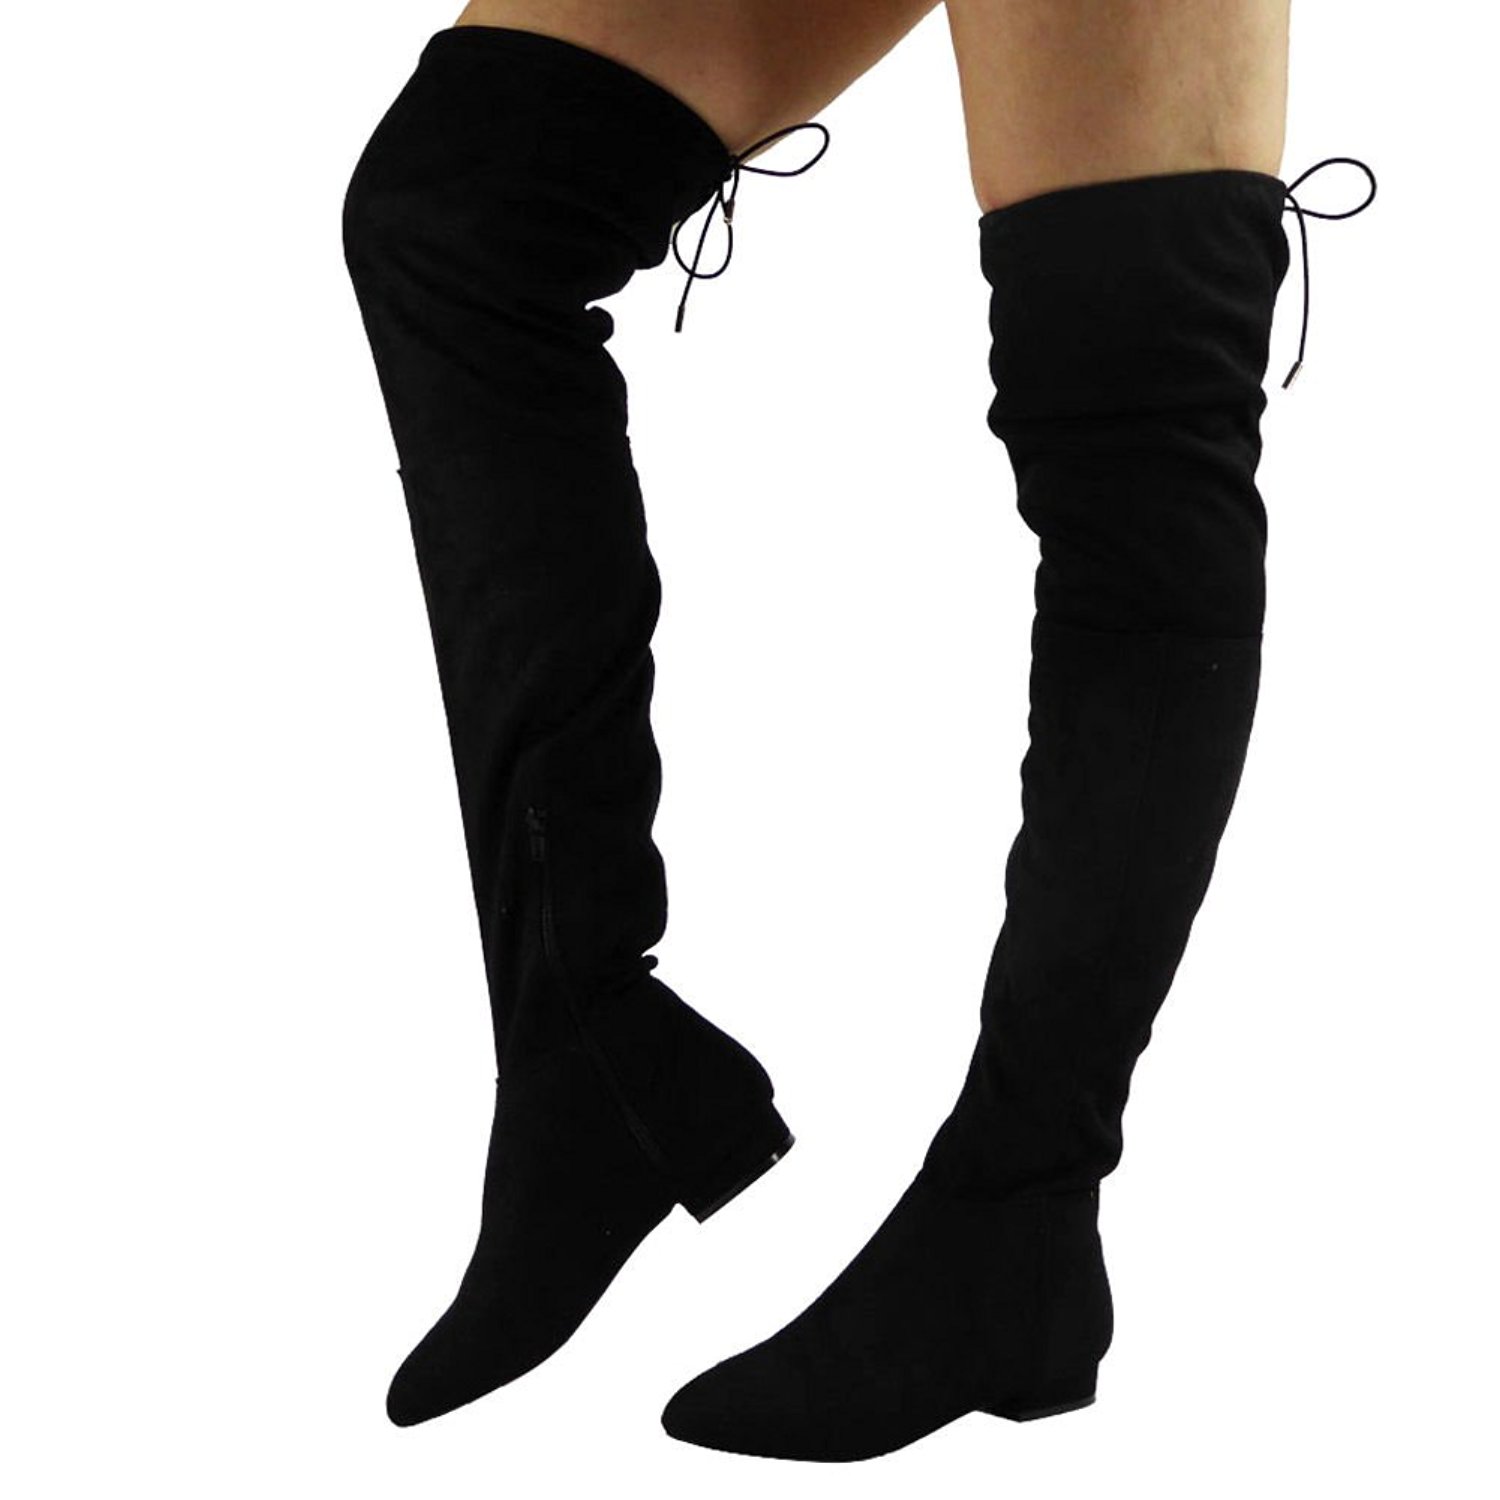 black knee high boots with small heel